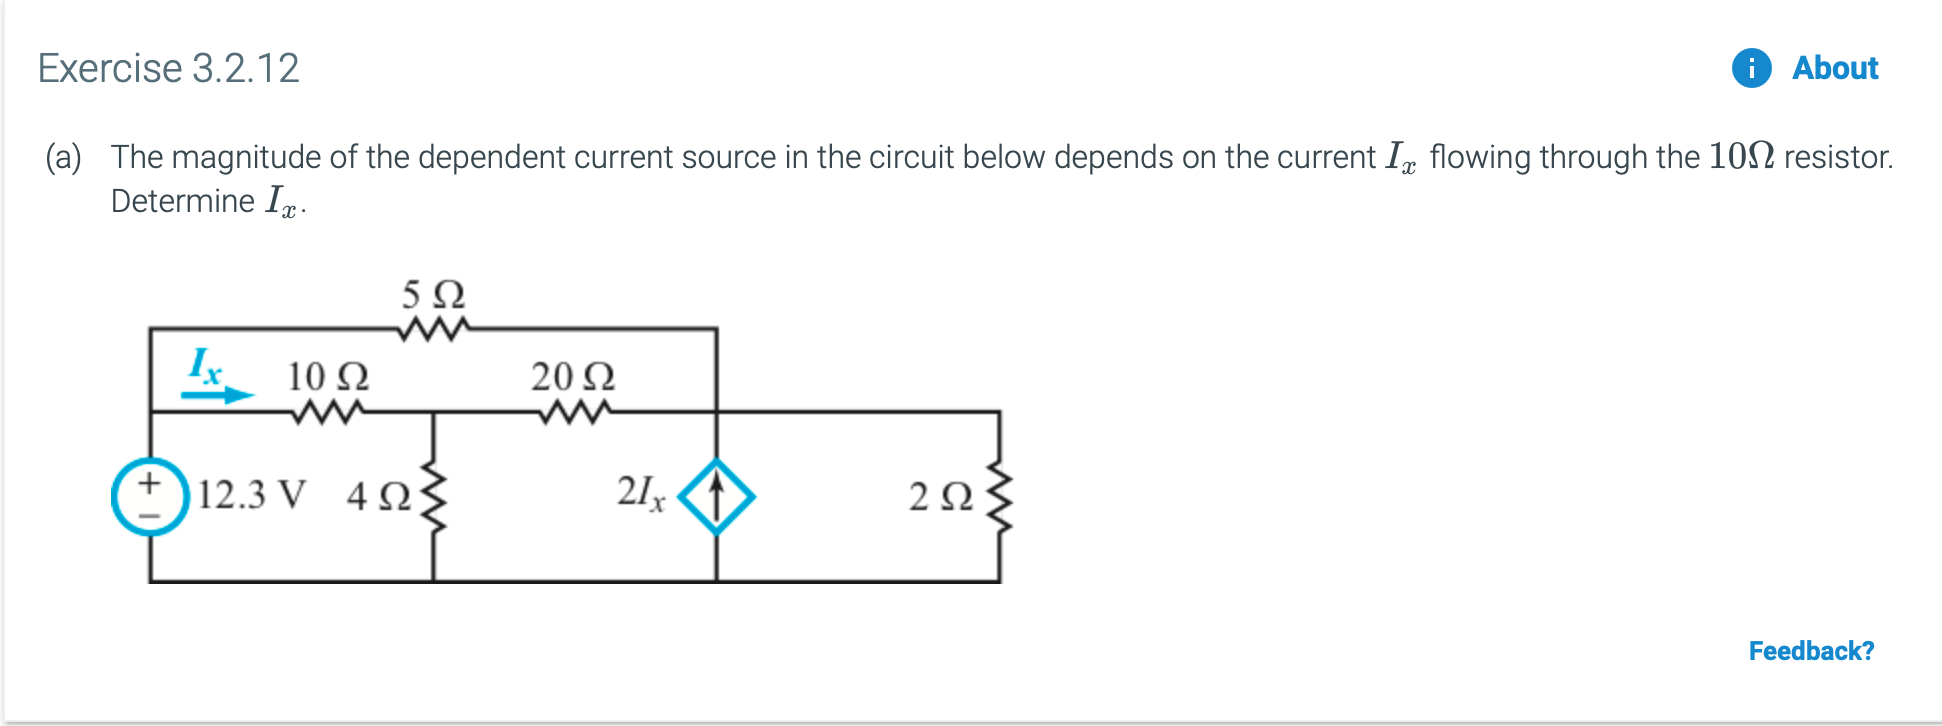 Exercise 3.2.12
About
The magnitude of the dependent current source in the circuit below depends on the current I,, flowing through the 102 resistor.
(a)
Determine I
5 Ω
w
10 Ω
20 2
12.3 V
4Ω
21x
2Ω
Feedback?
